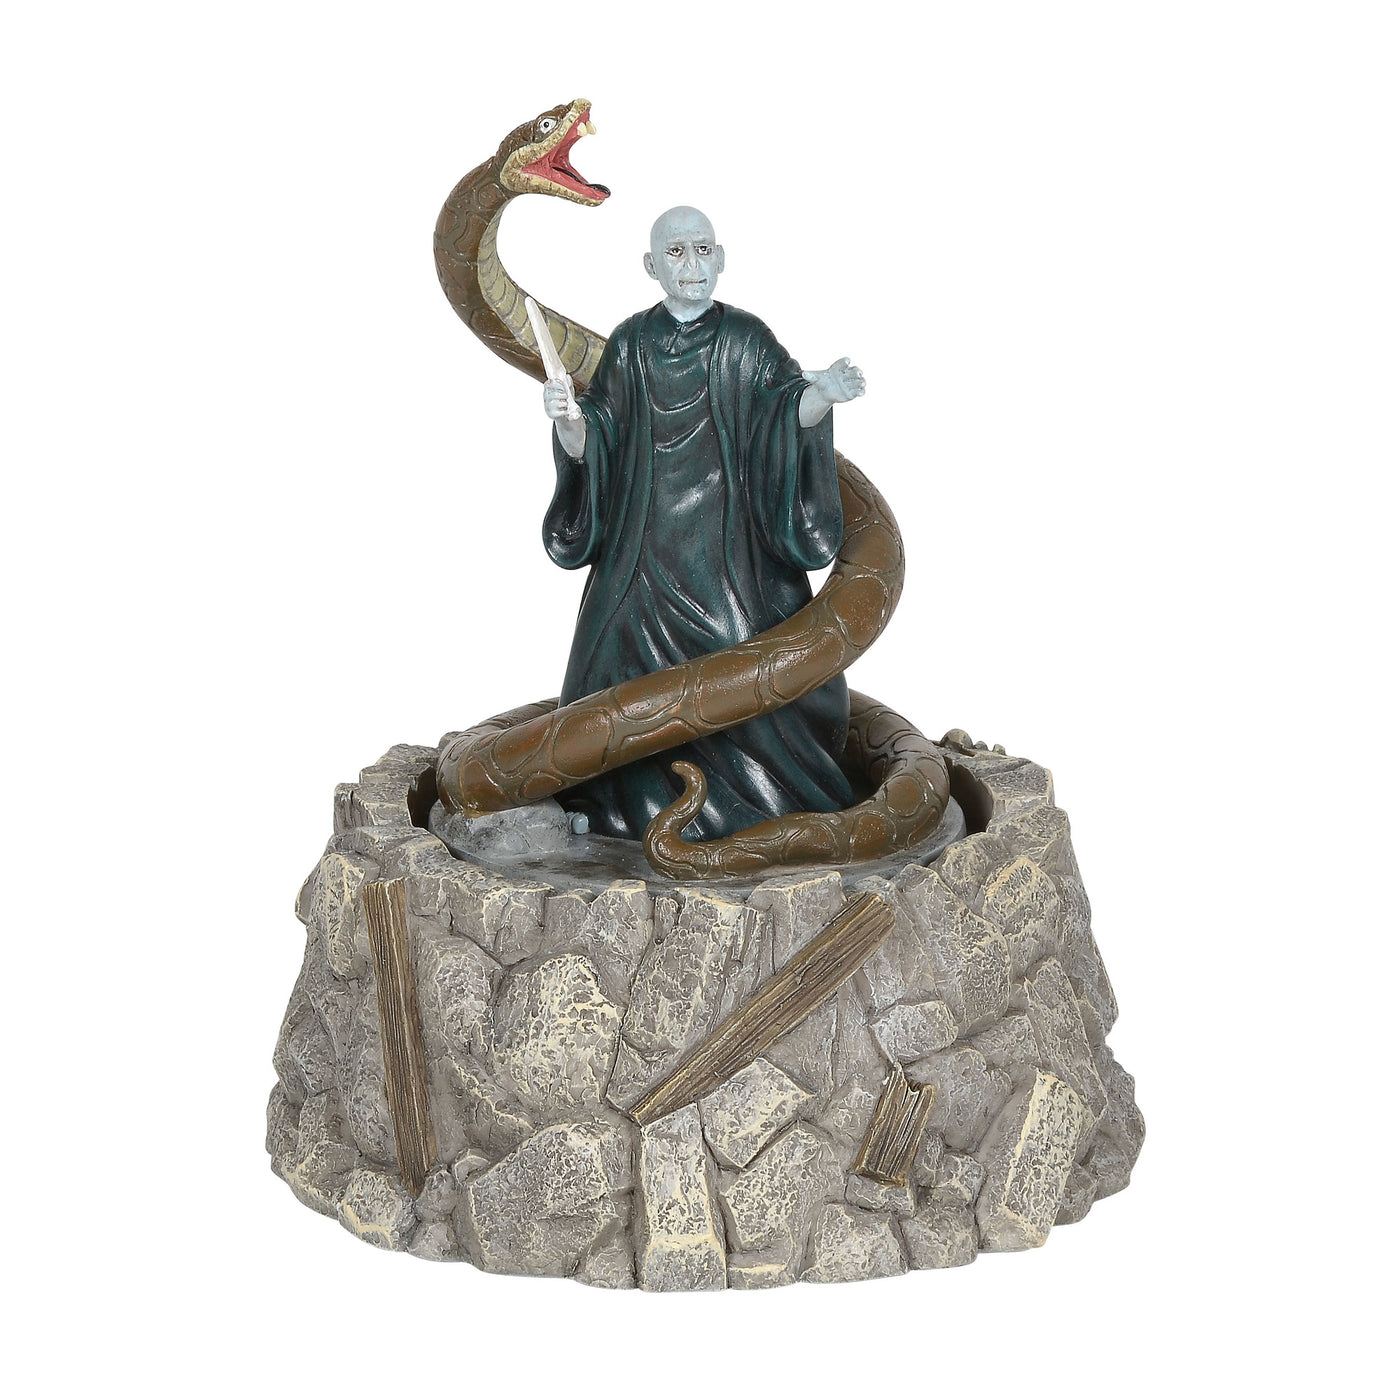 Department 56 Harry Potter Village Lord Voldemort & Nagini Figurine New with Box